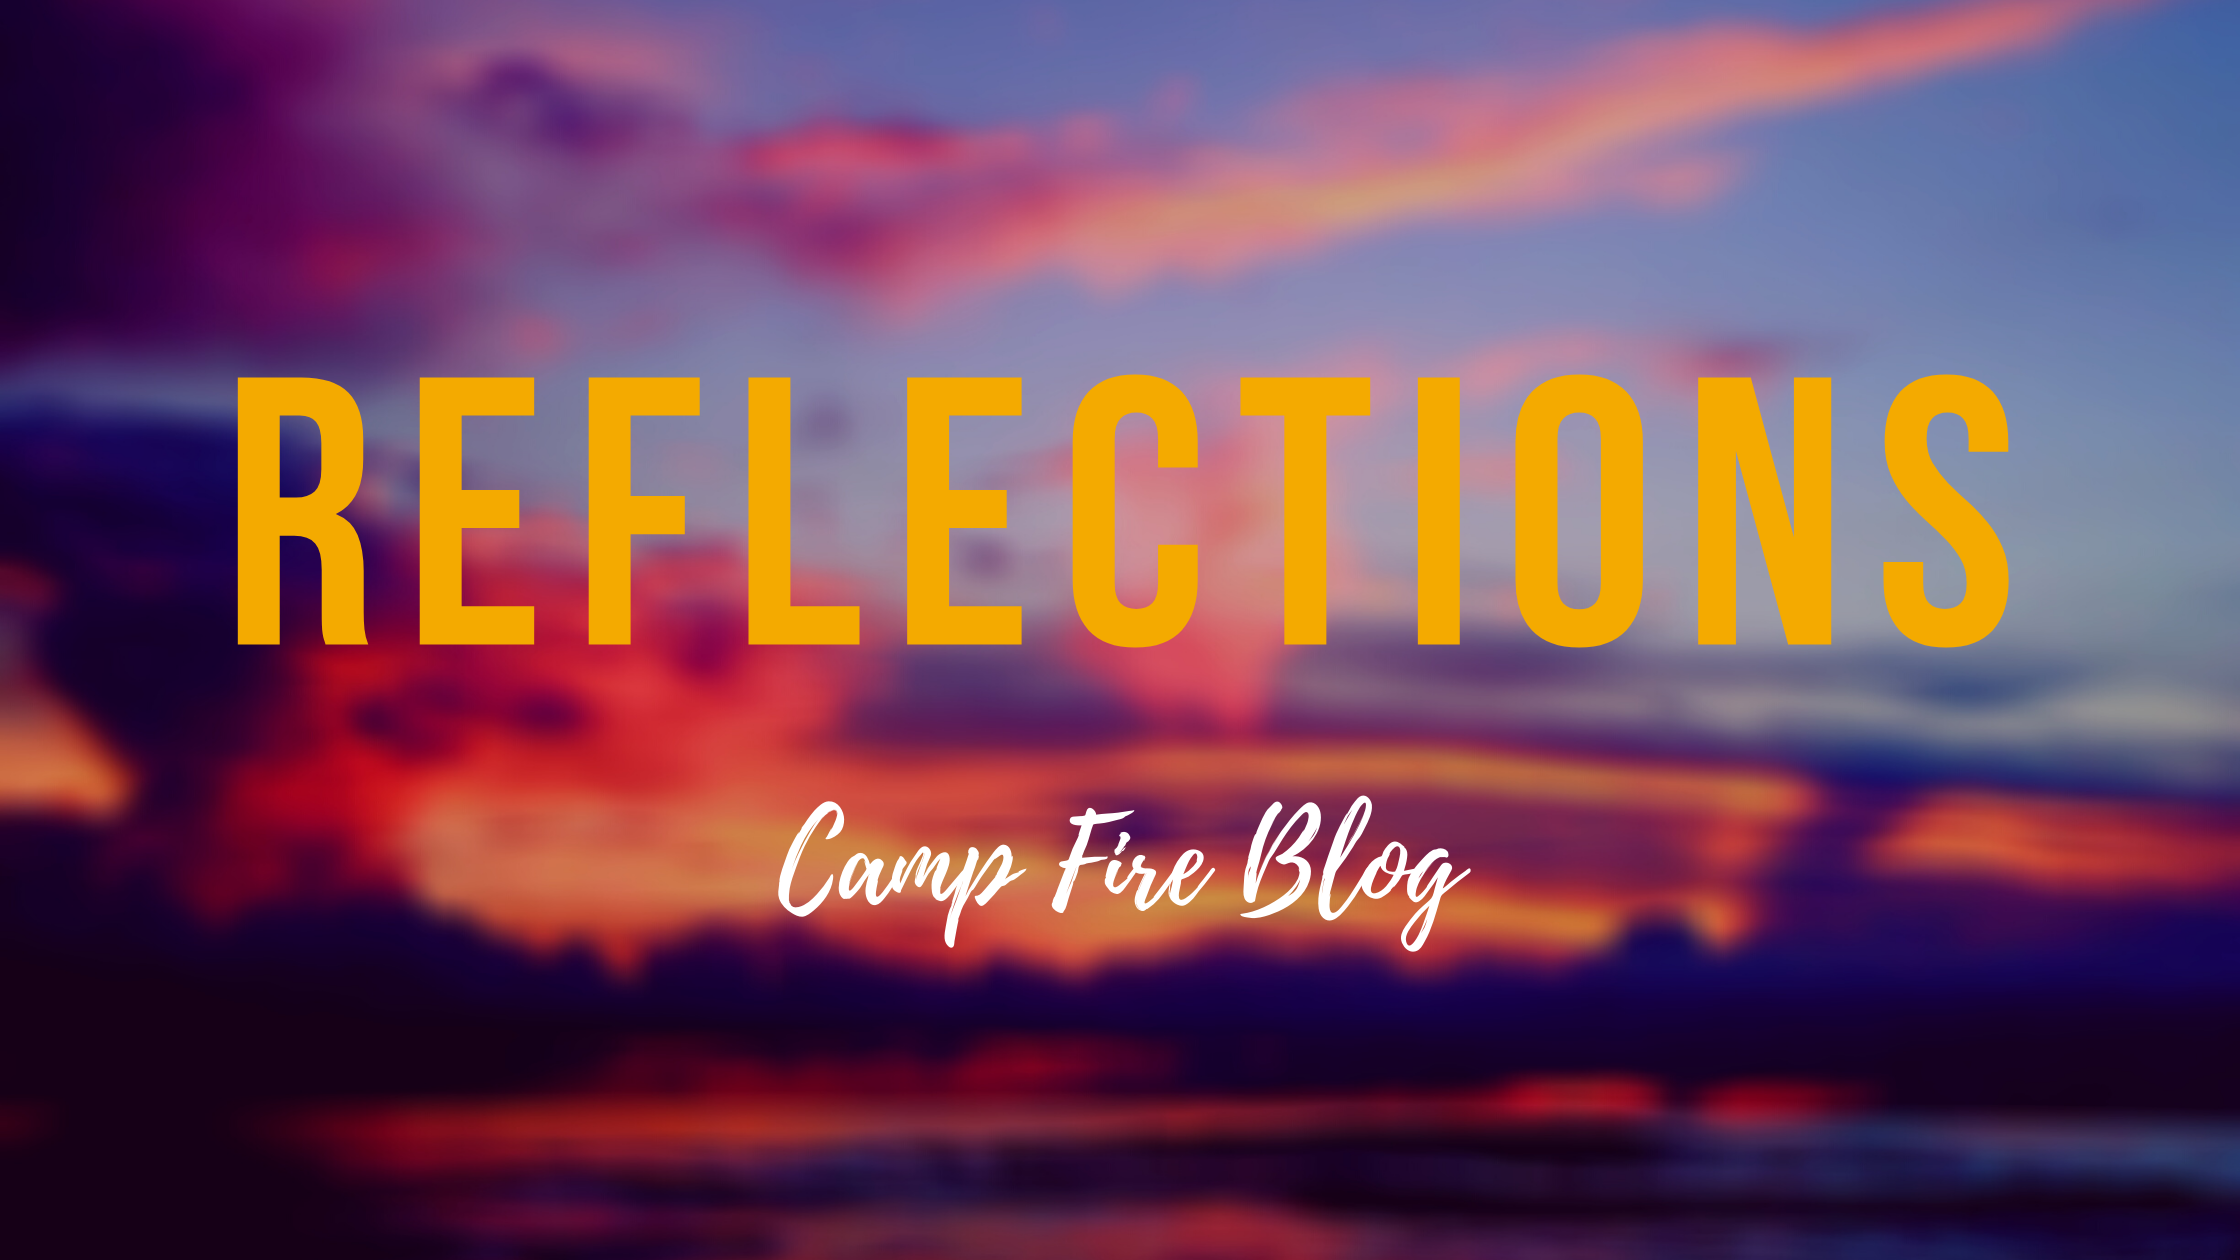 Reflections Camp Fire Blog text over sunset photo